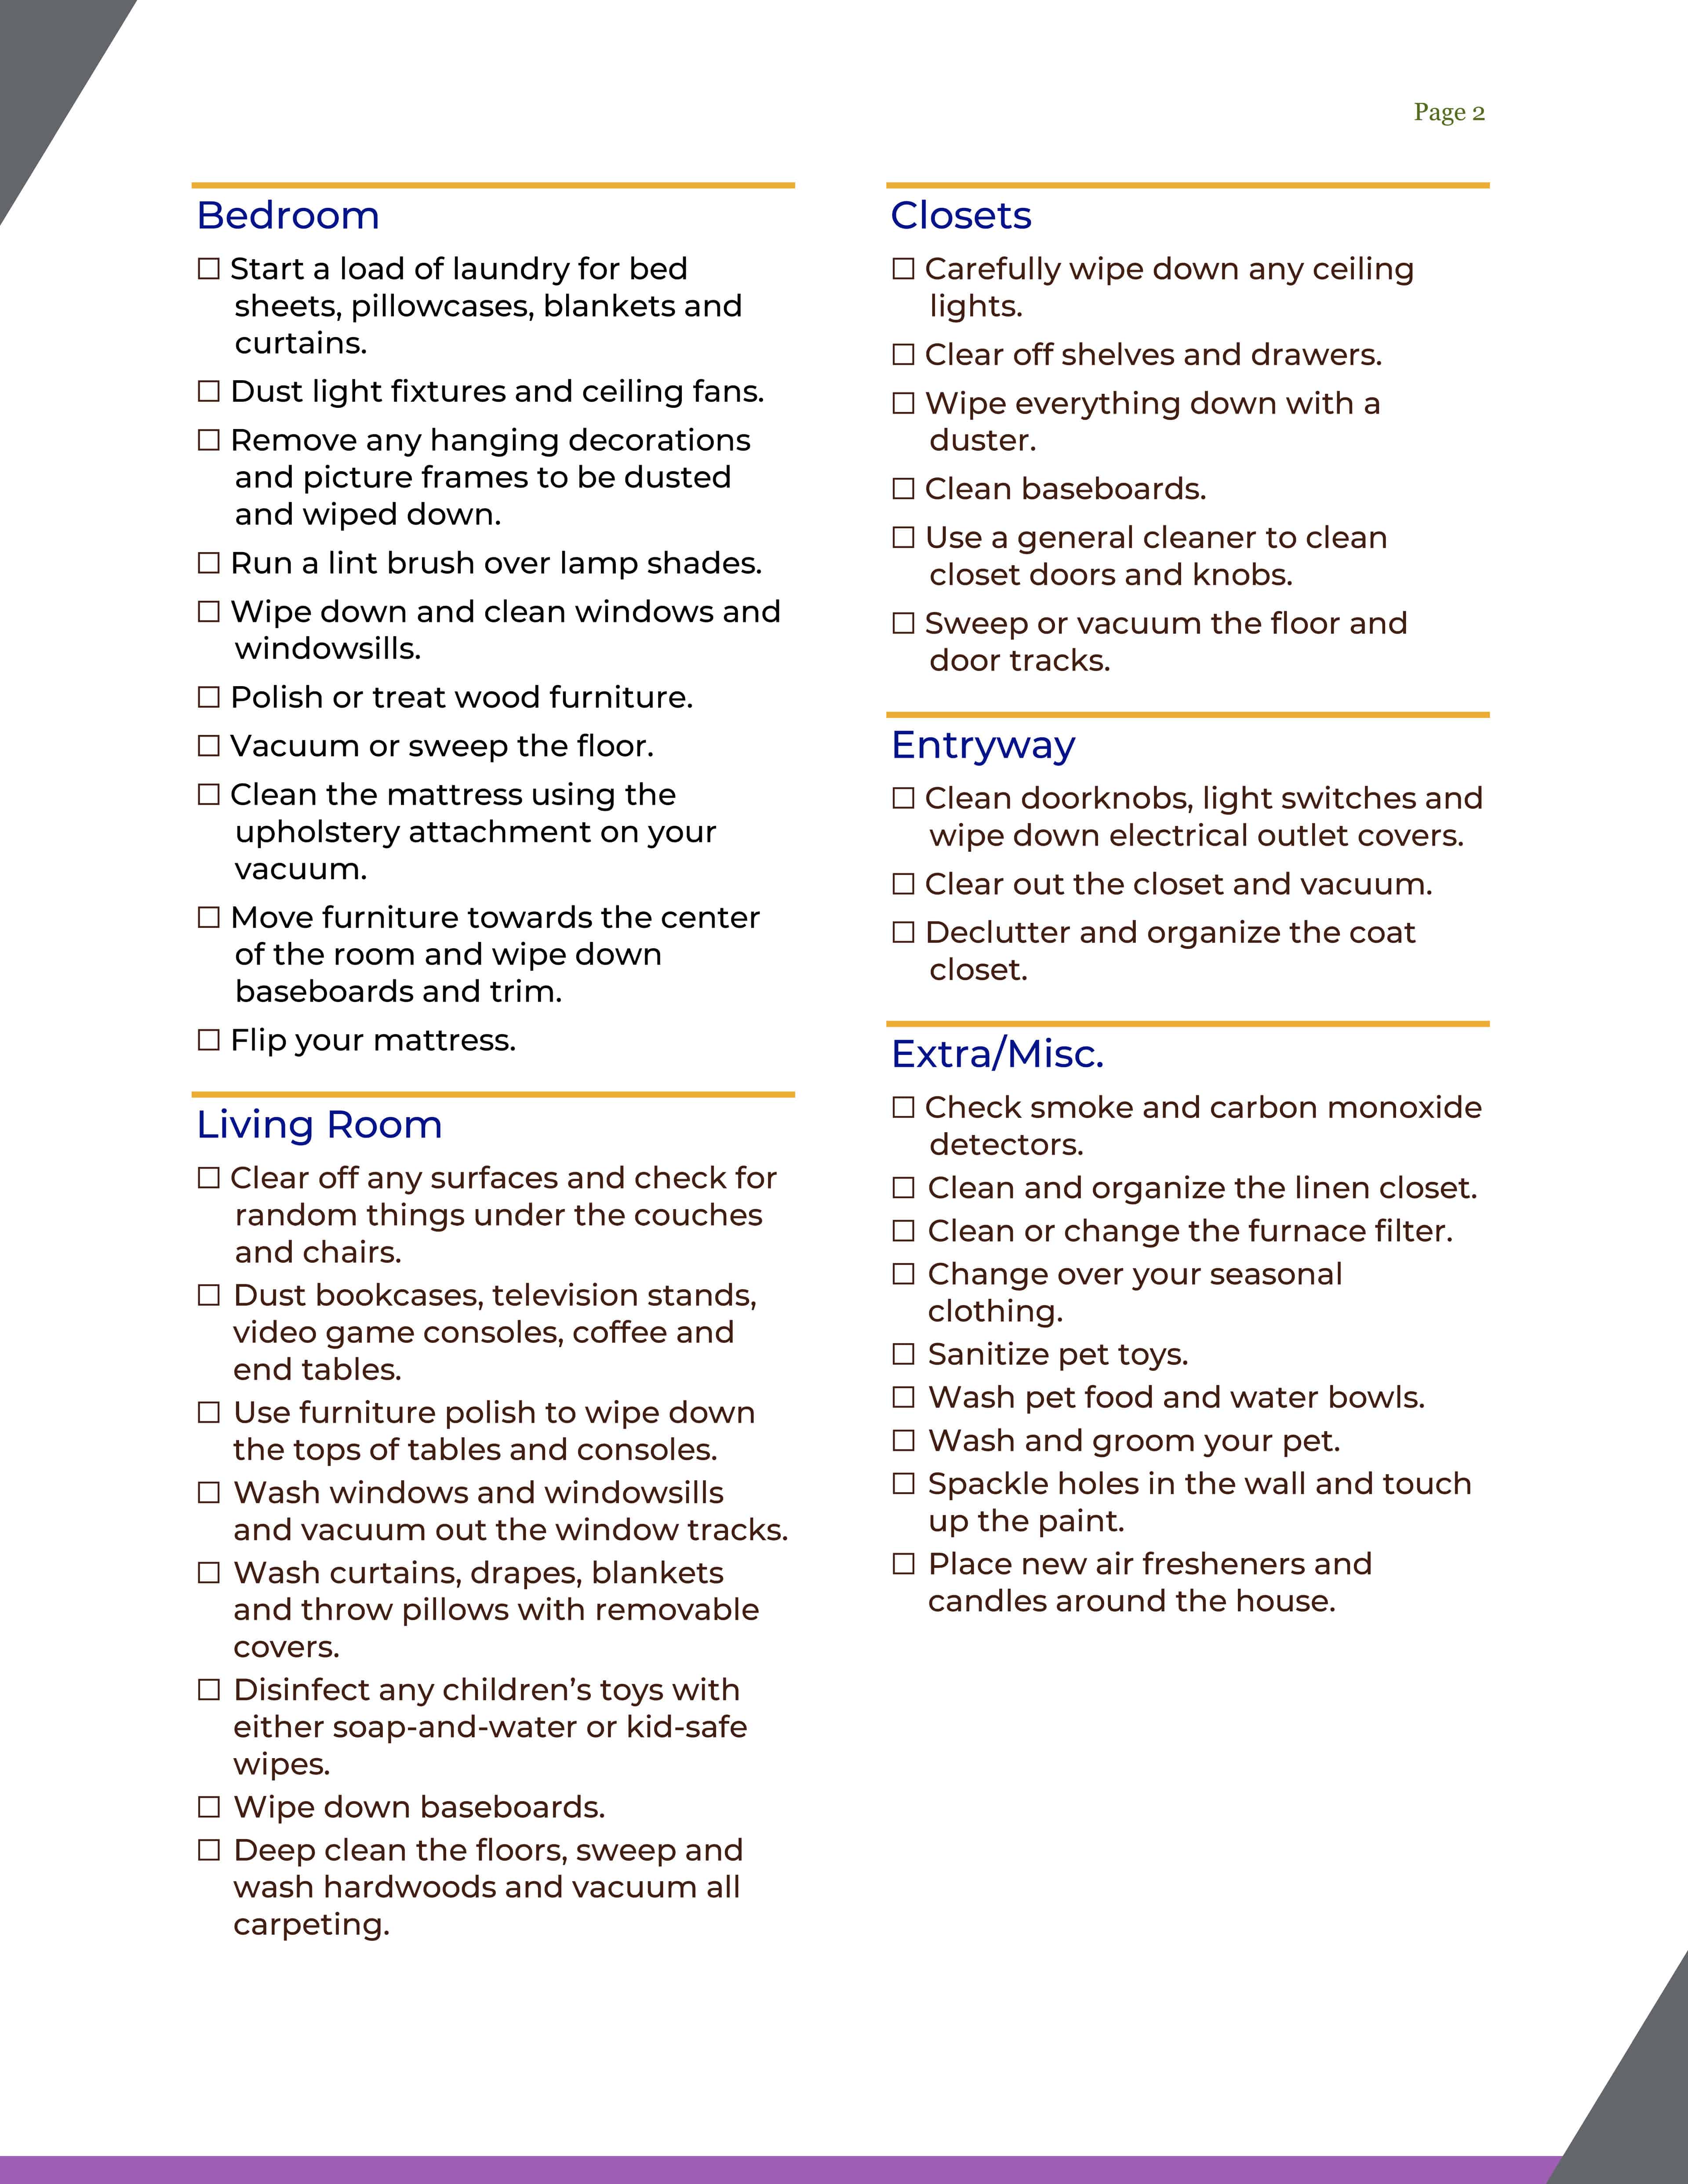 Spring Cleaning Checklist Page 2